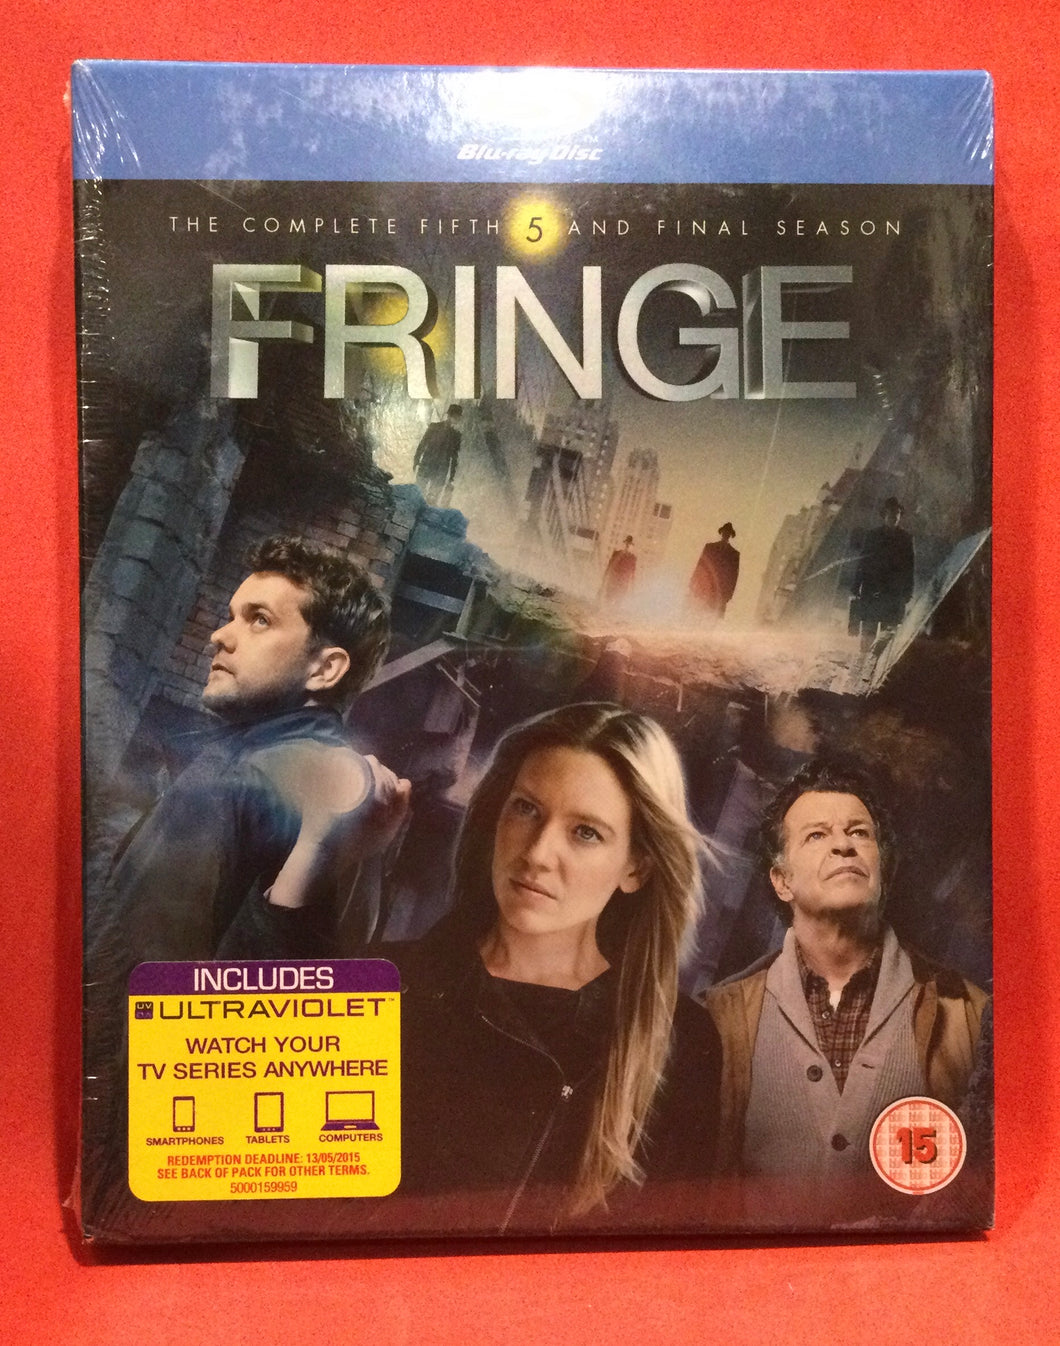 FRINGE - THE COMPLETE FIFTH AND FINAL SEASON - BLU-RAY - 6 DVD DISCS (SEALED)